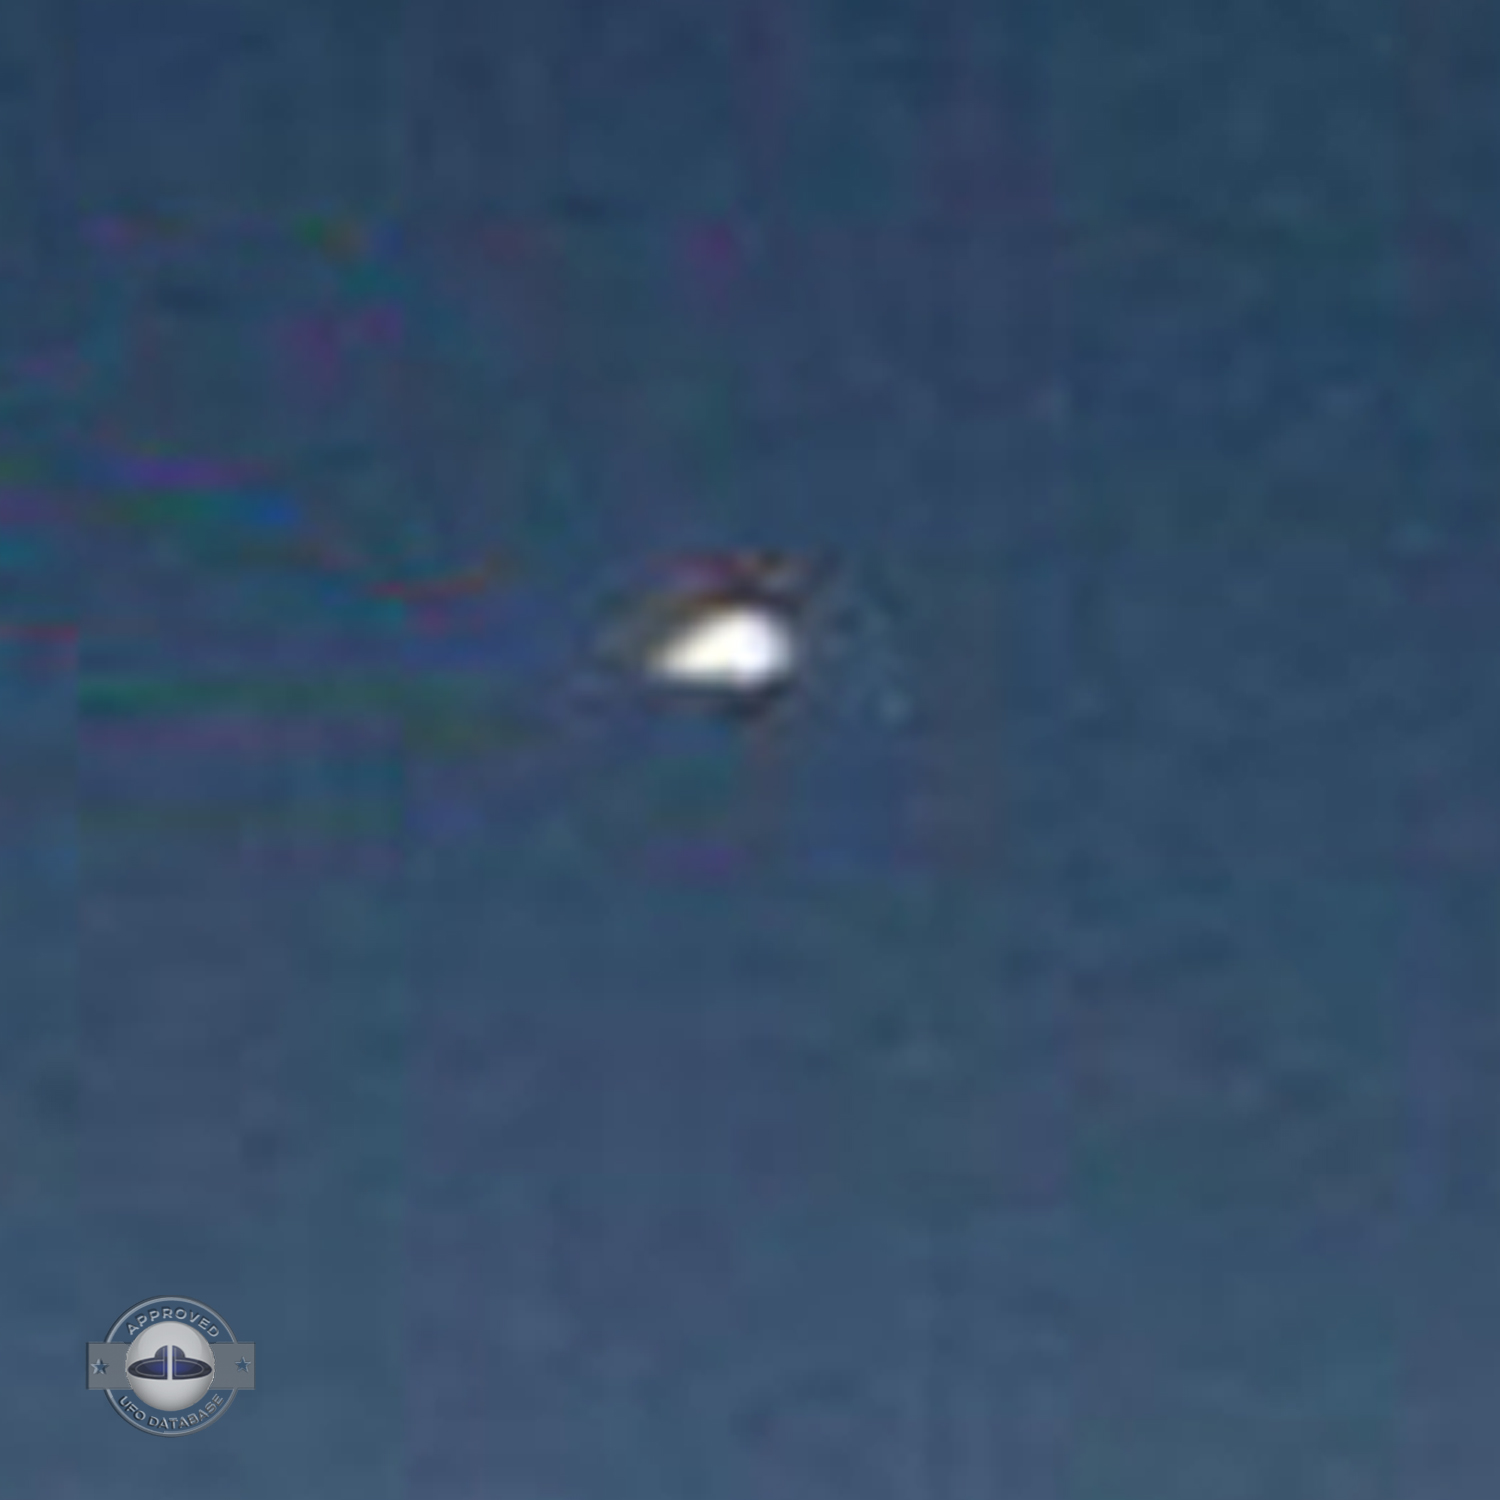 UFO seen over India between New Delhi to Guwahati | UFO picture 2008 UFO Picture #195-5